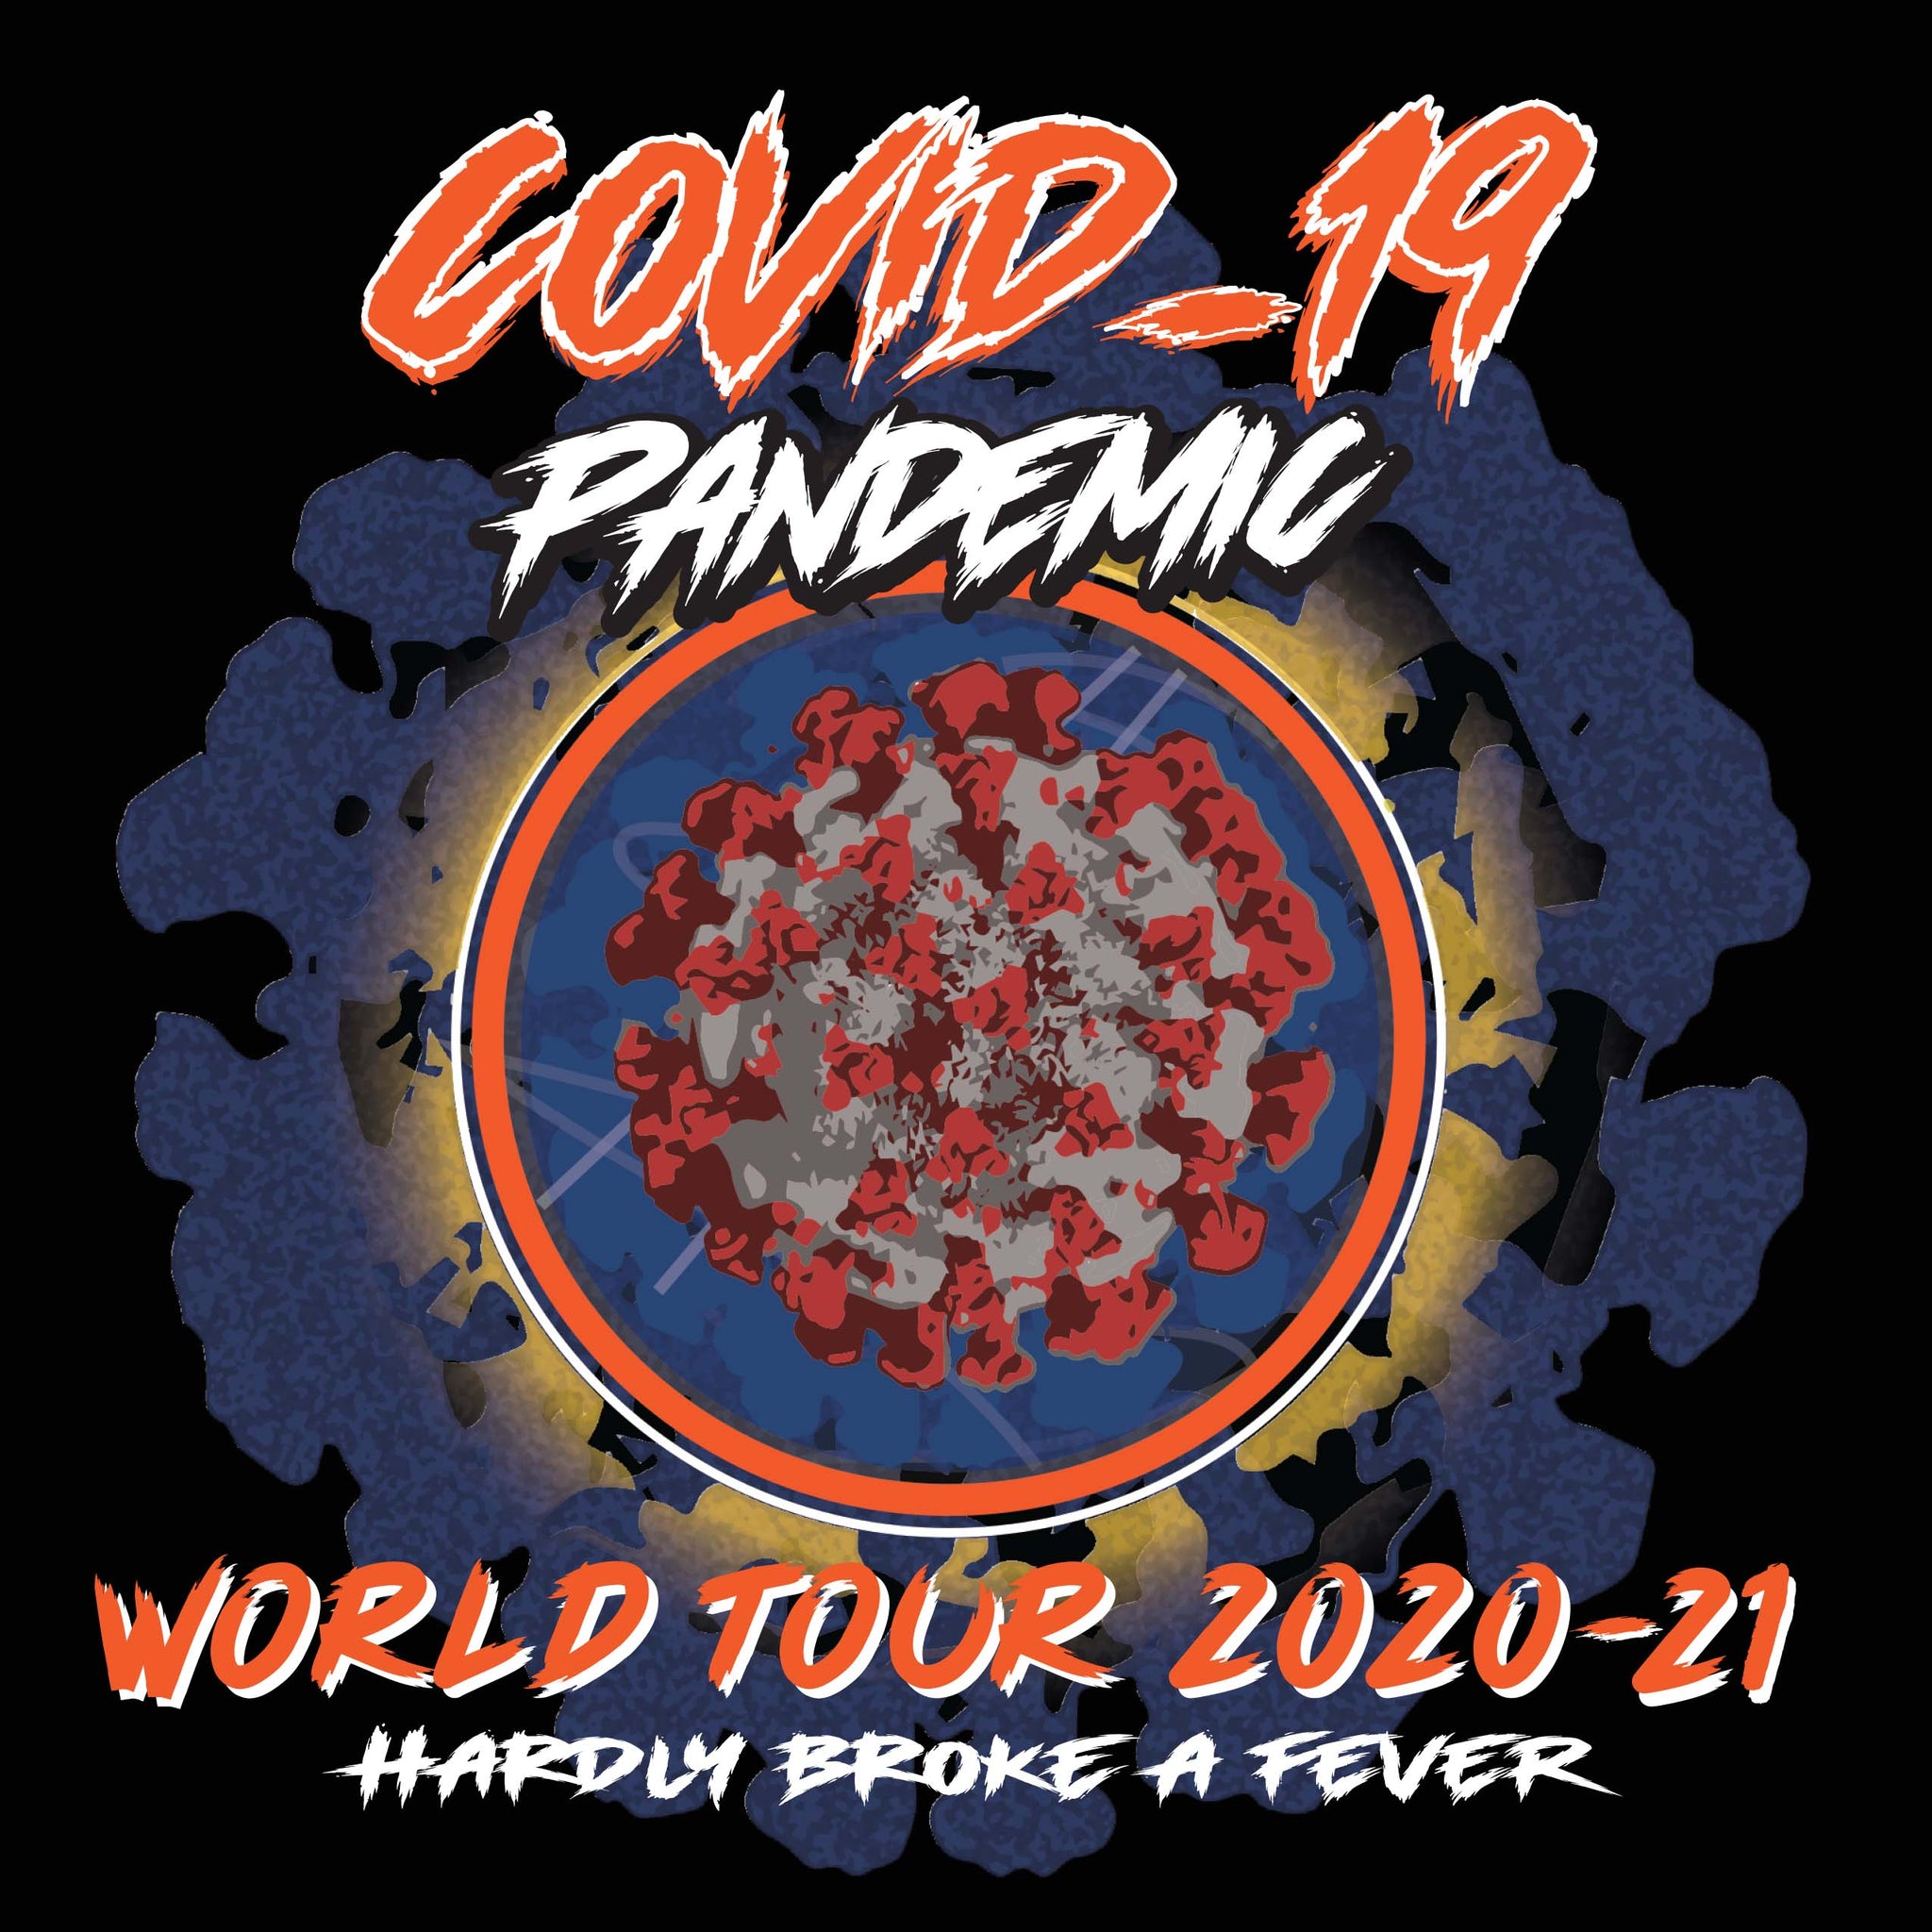 Rock music tour design for the covid19 pandemic